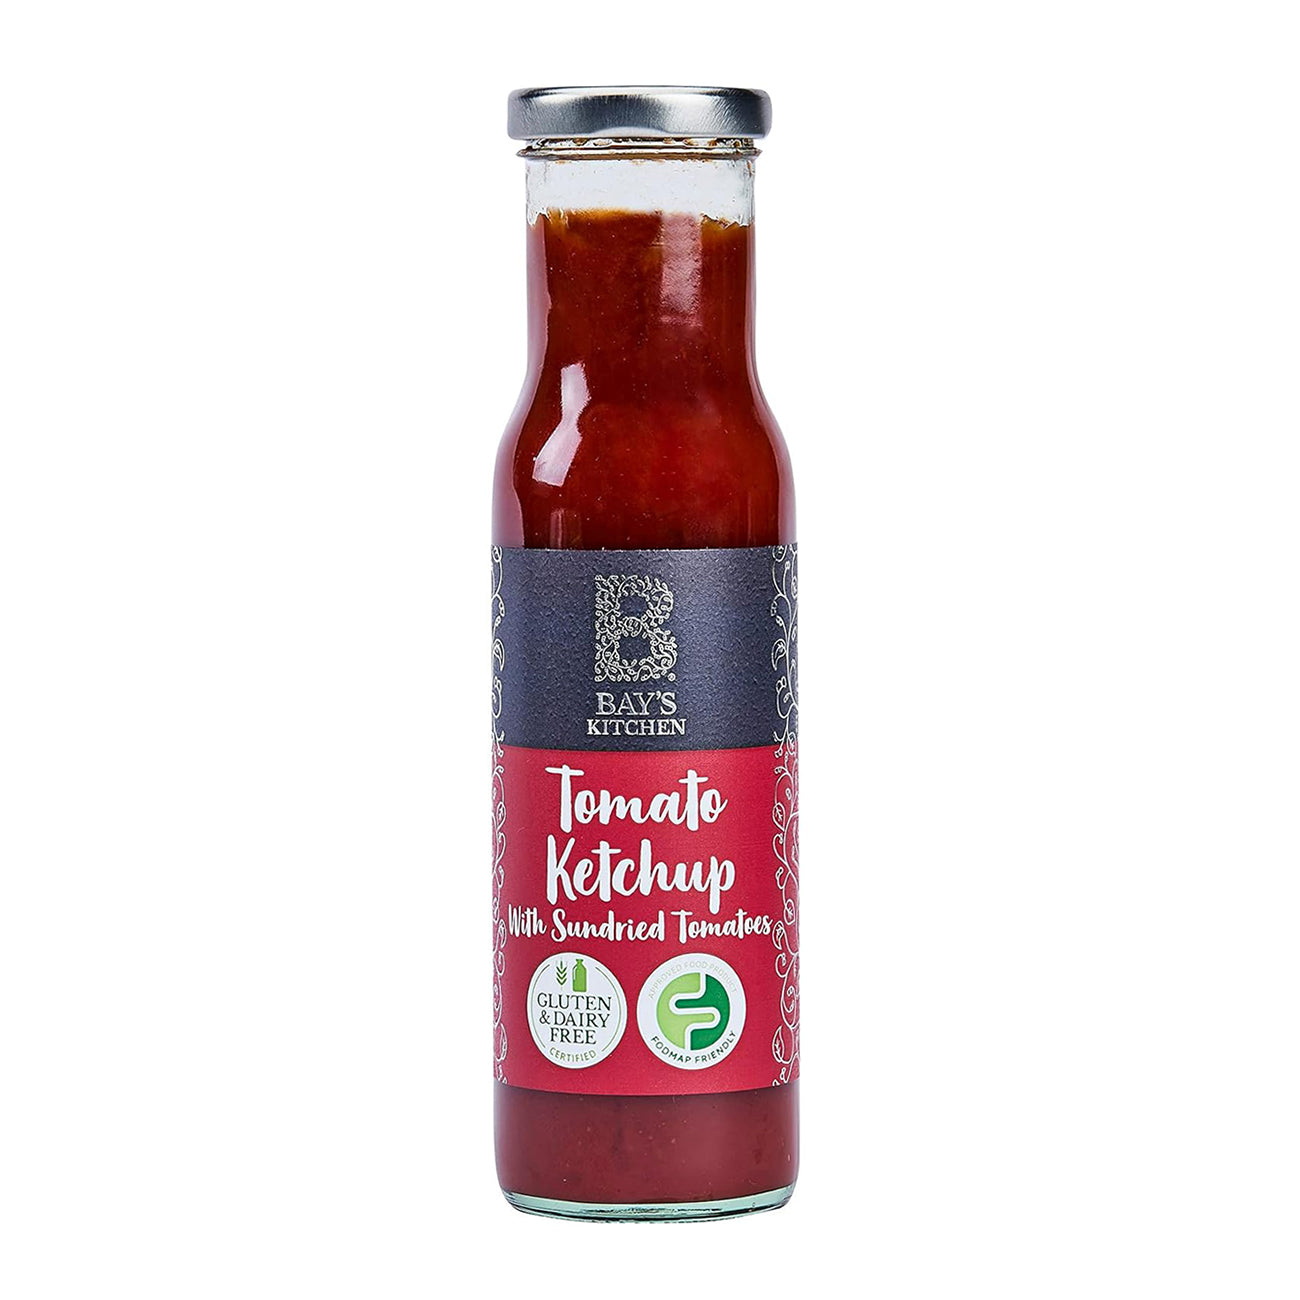 Tomato Ketchup with Sundried Tomatoes 270g